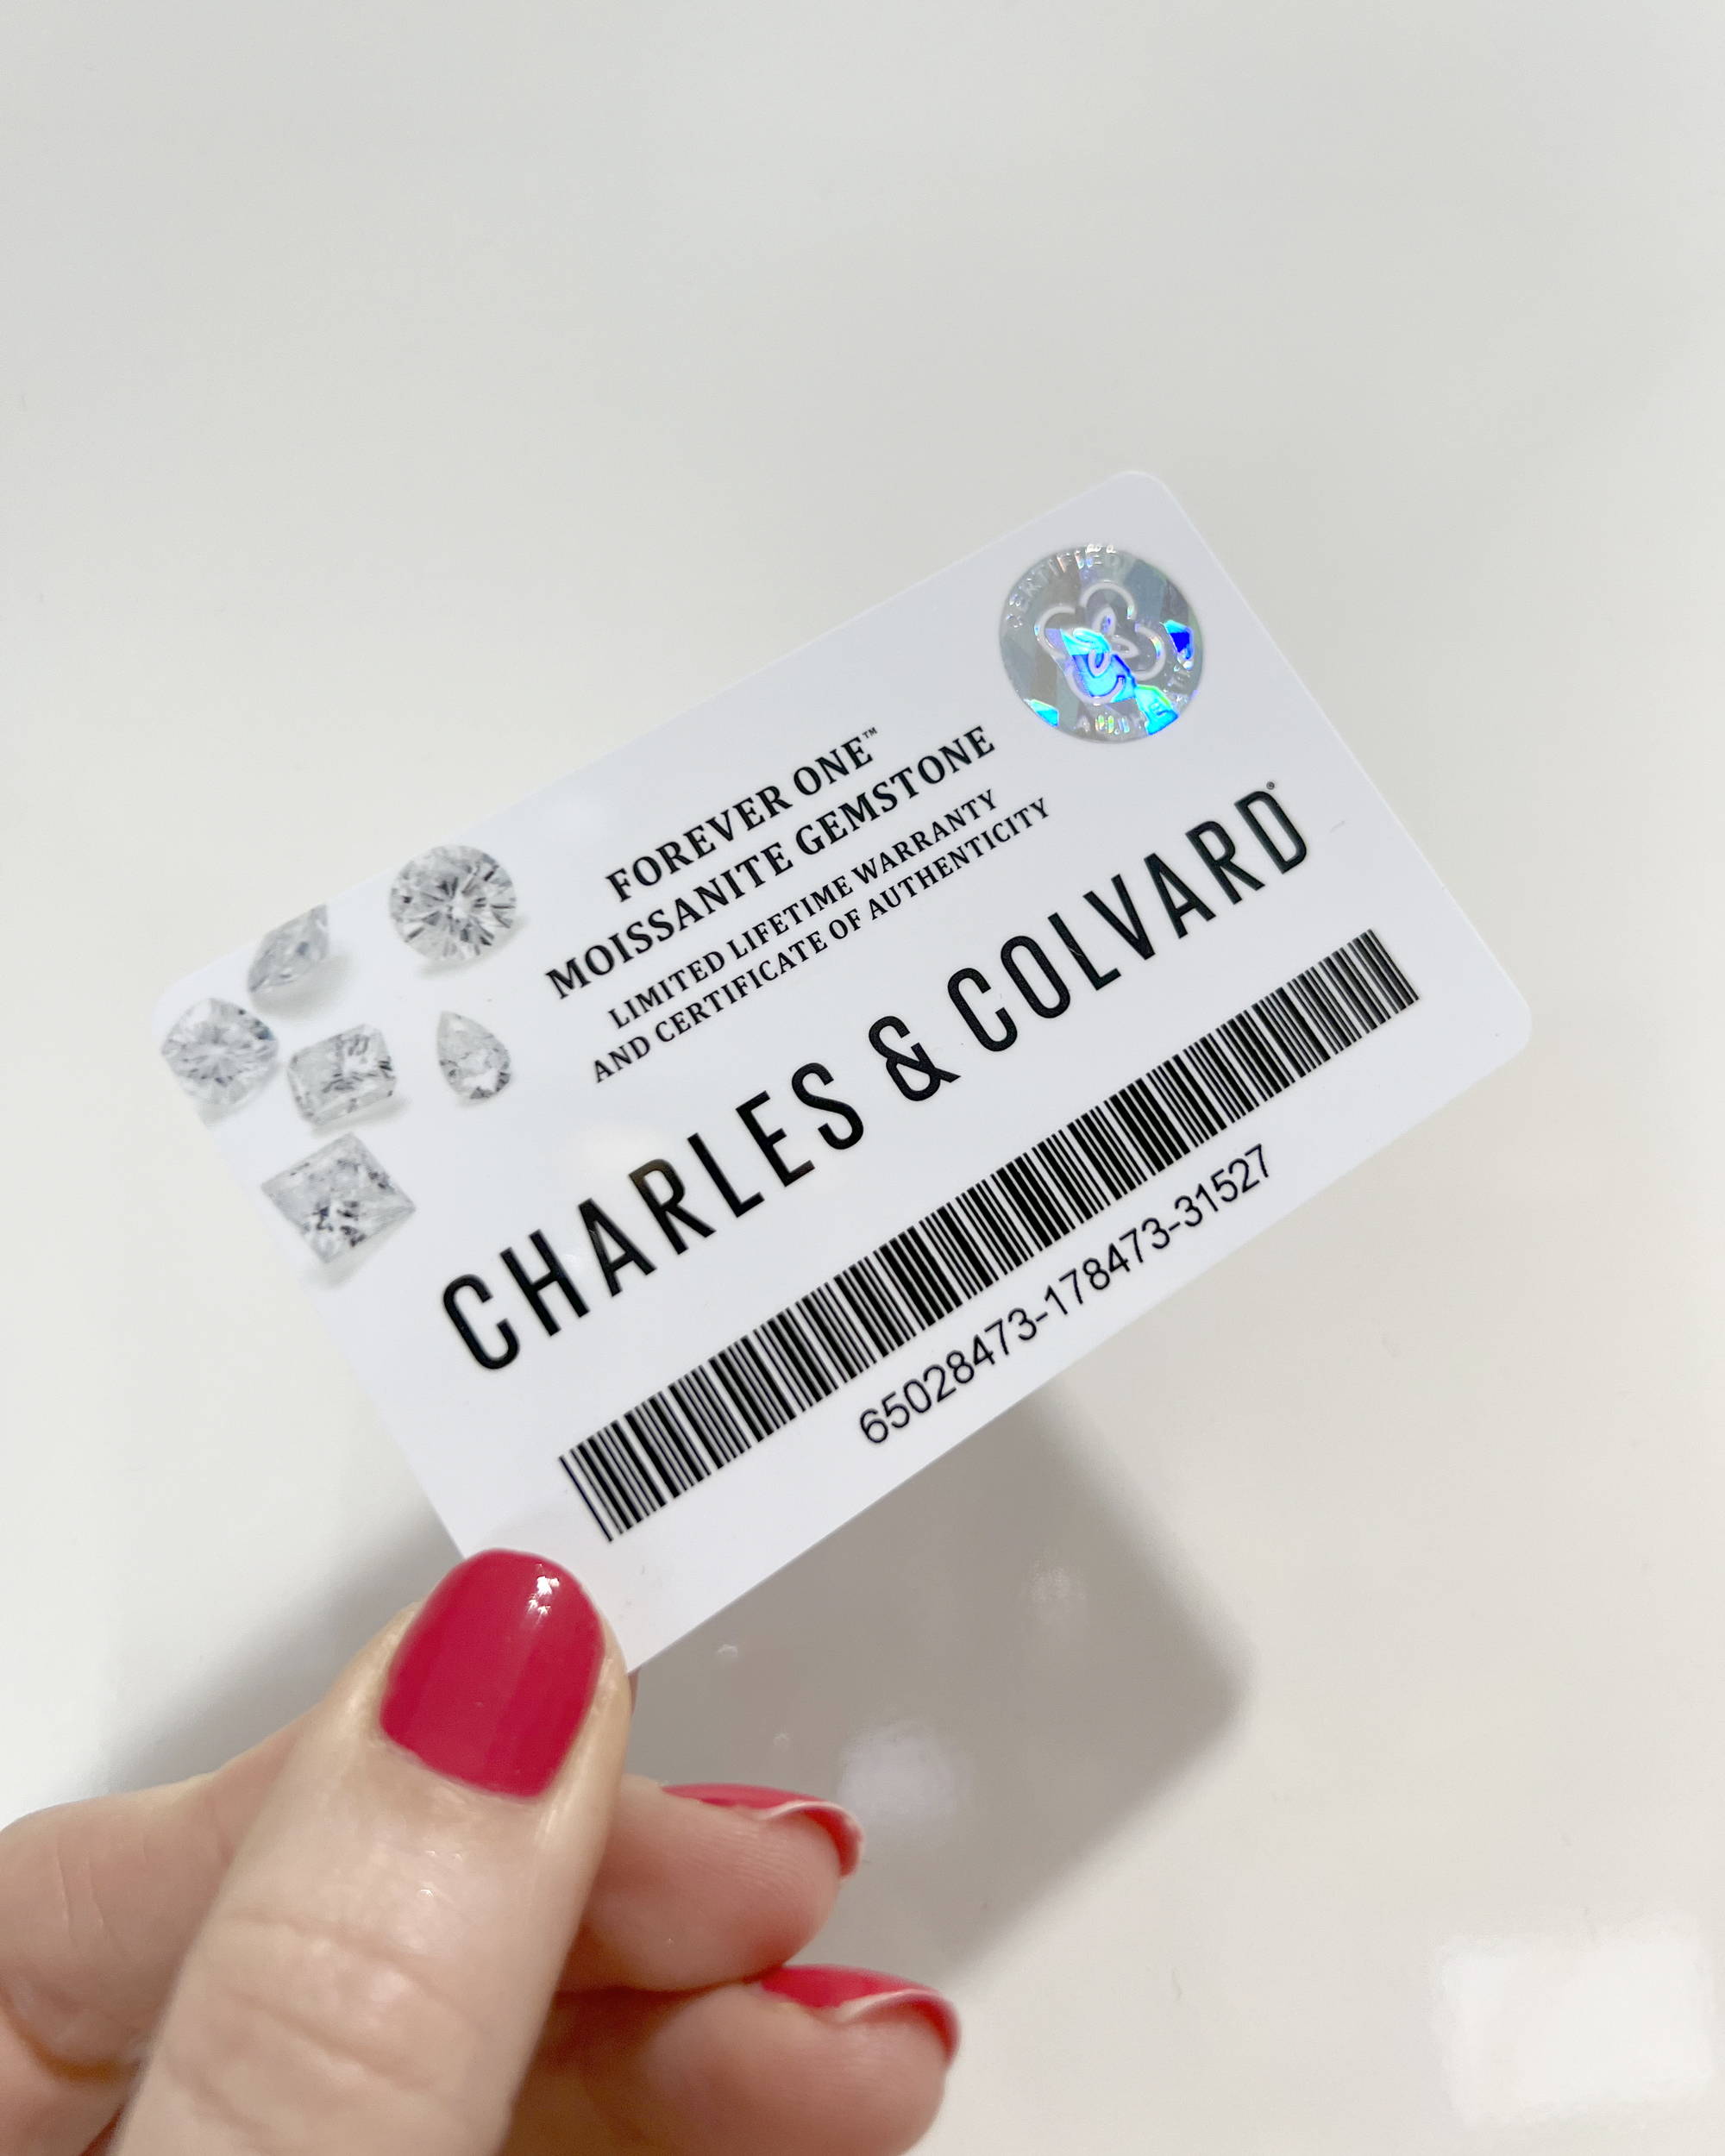 One hand holds the authorized sales card of Charles & Colvard, the largest moissanite manufacturer in the world.